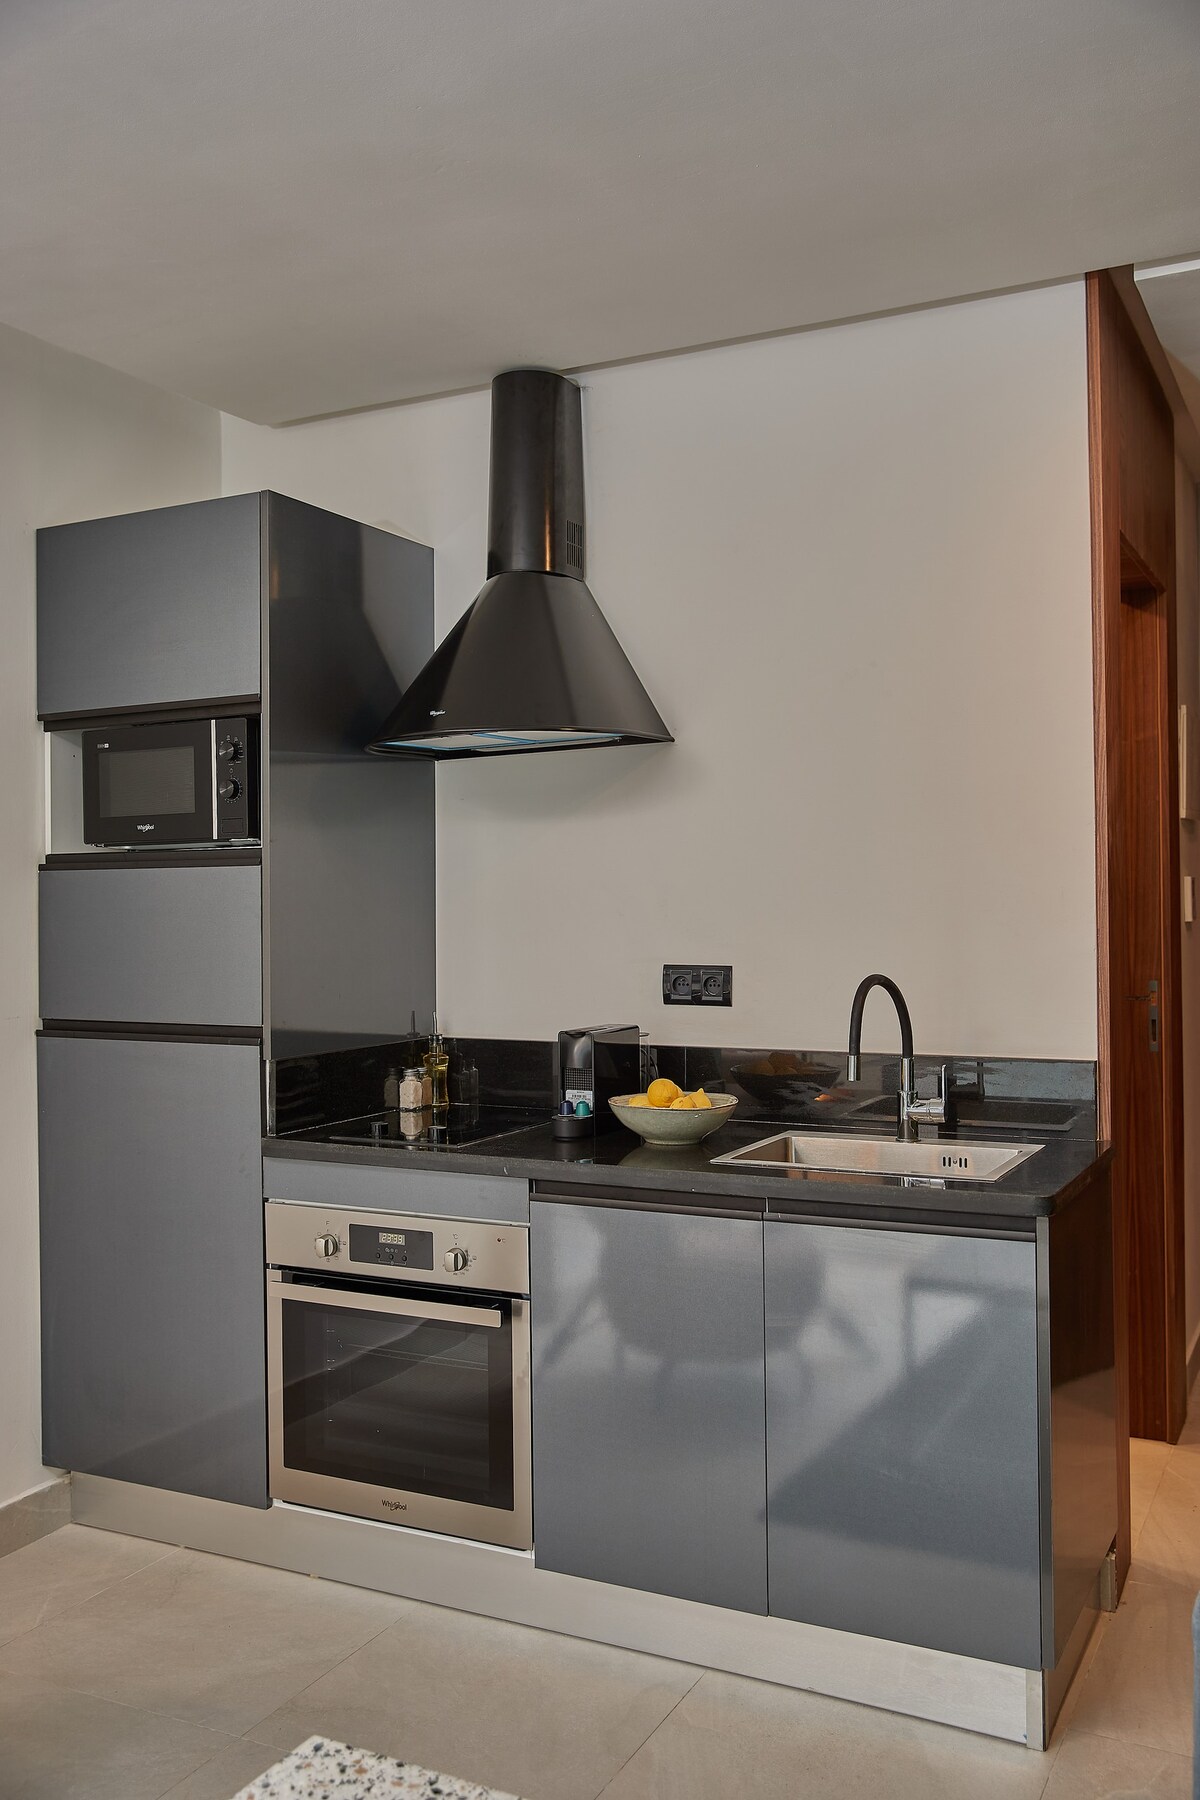 StayHere |1BR| Private Balcony | Free Parking